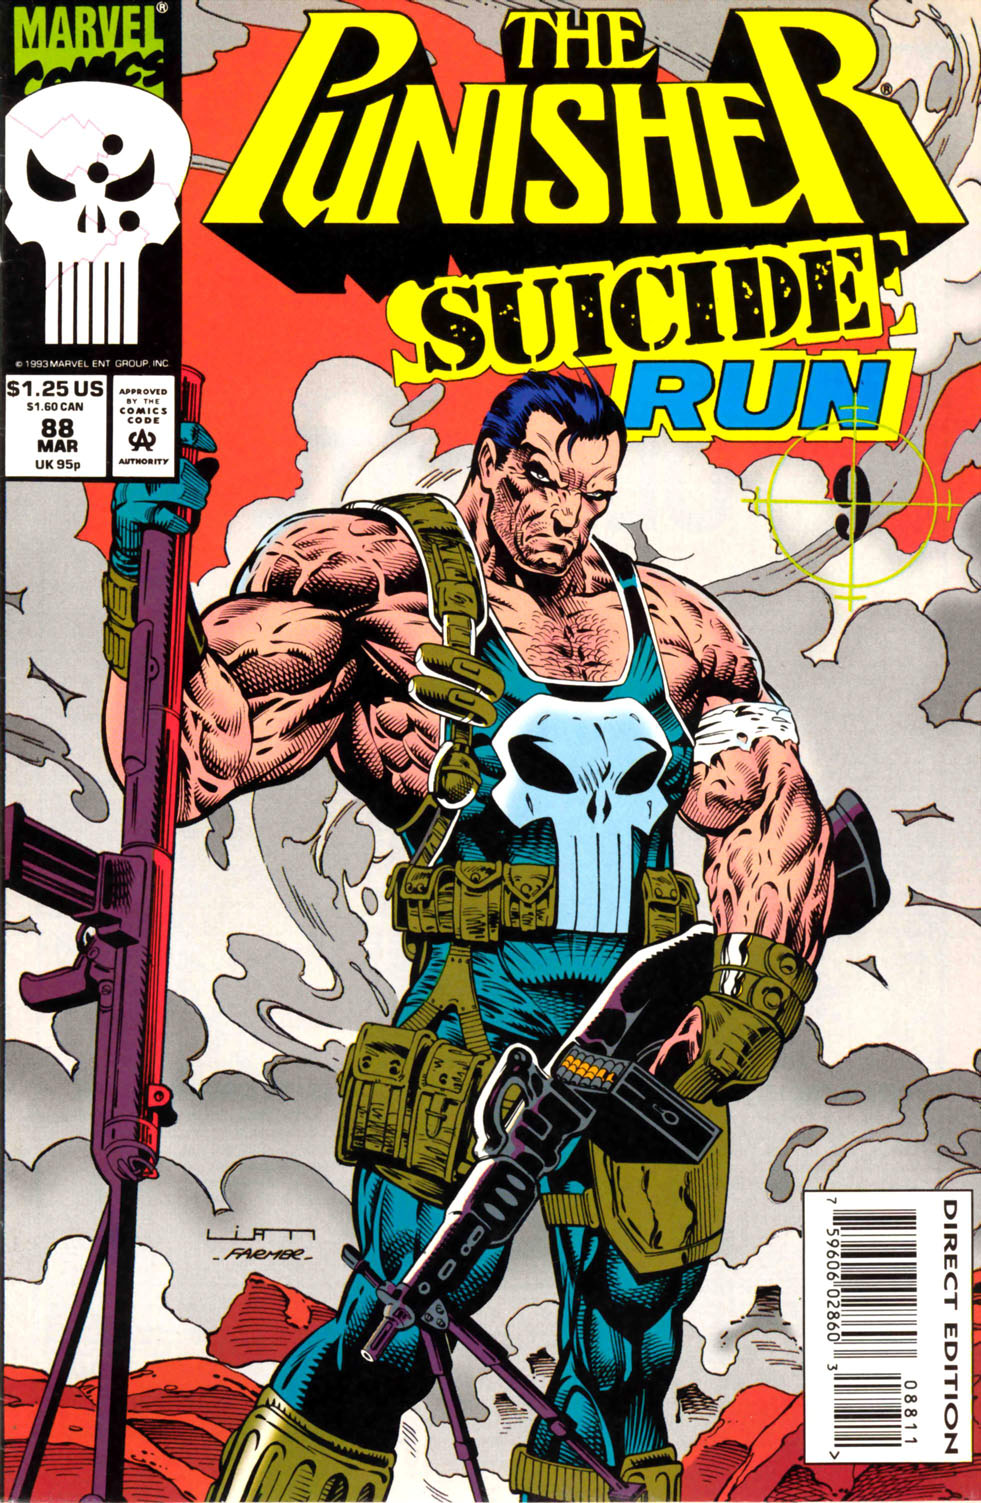 The Punisher (1987) Issue #88 - Suicide Run #09 #95 - English 1